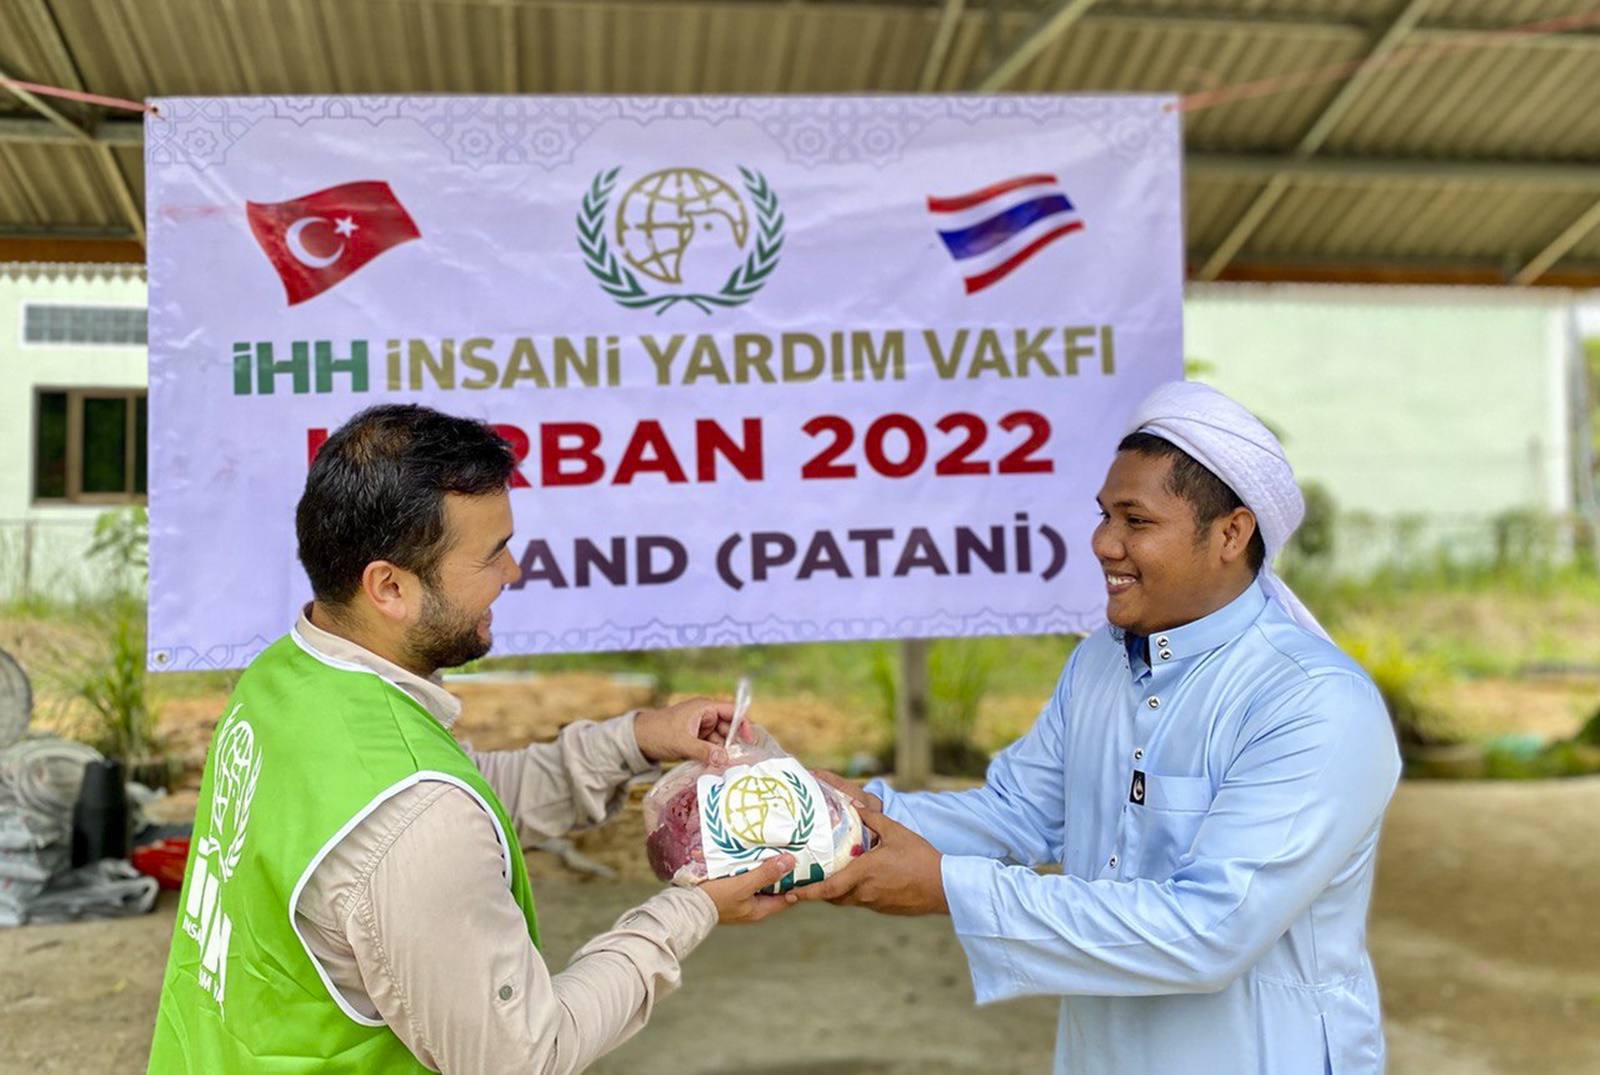 IHH delivered qurban meat to 2.6 million people